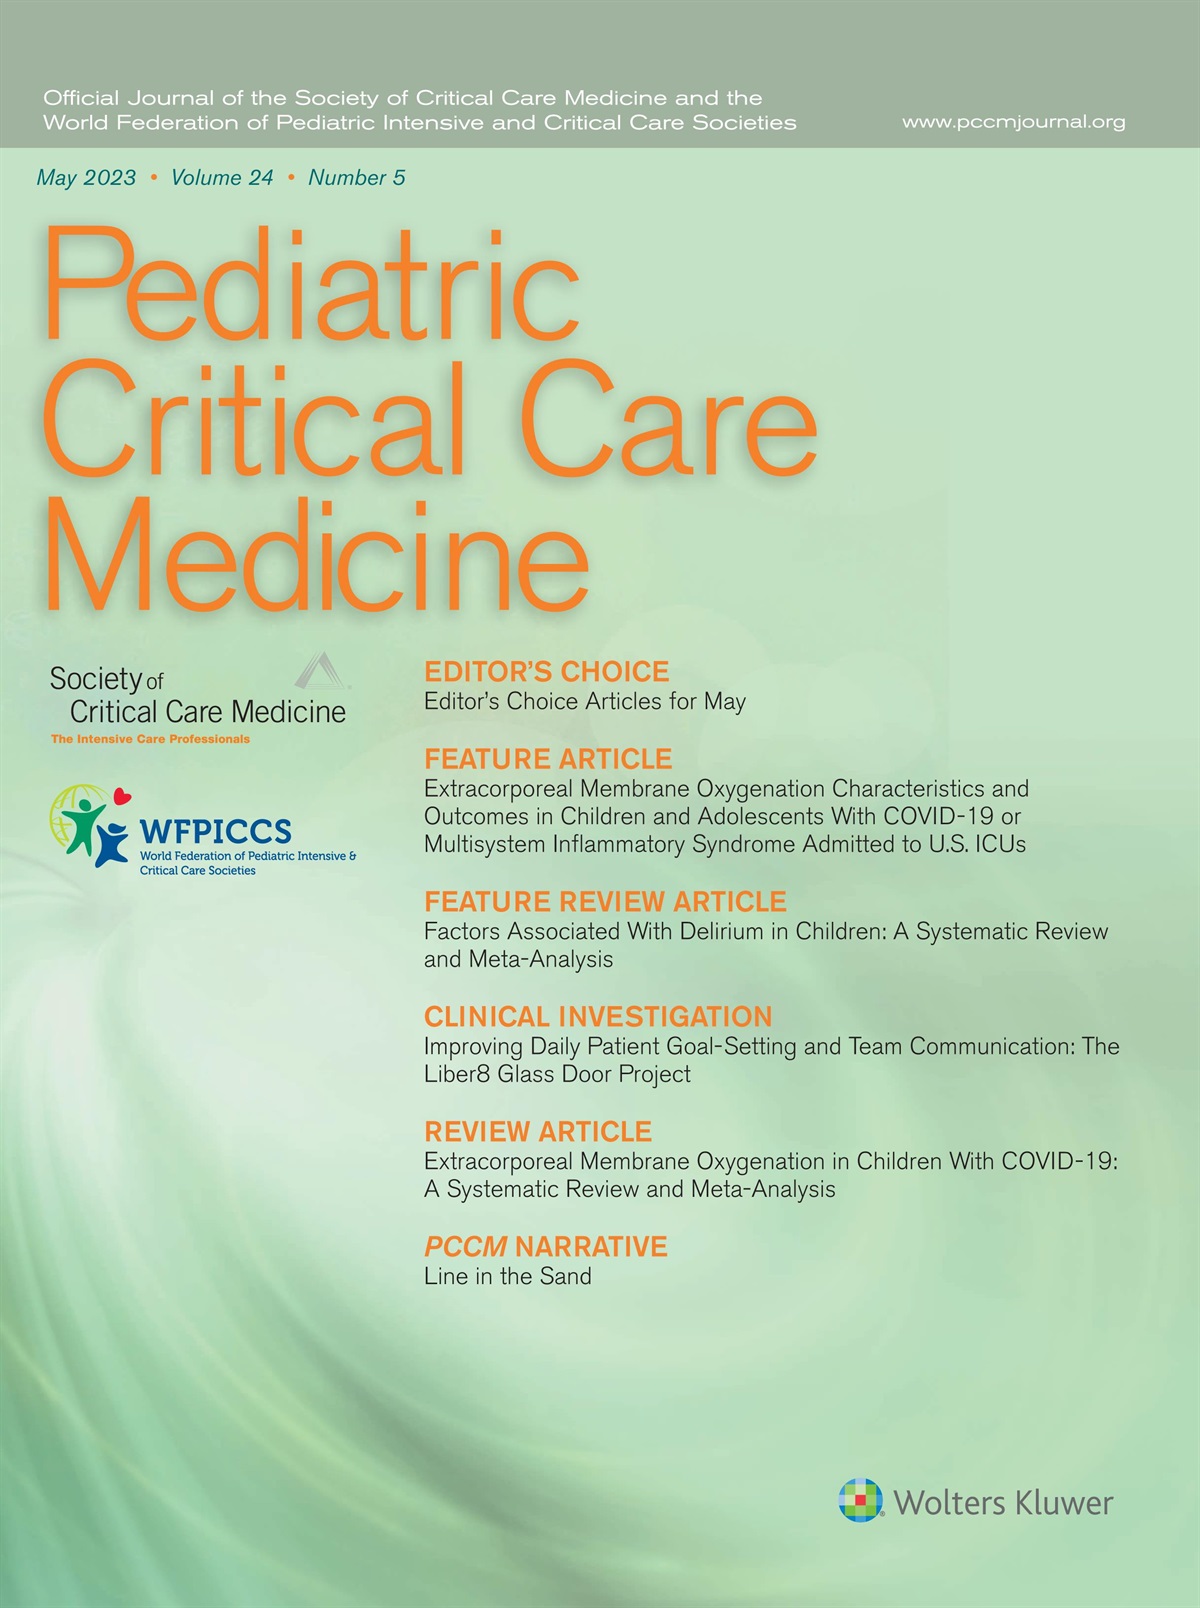 Tickle Me ECMO…Differences and Outcomes Unearthed for Kids Requiring Extracorporeal Membrane Oxygenation in Severe Acute Respiratory Syndrome Coronavirus 2–Associated Disease*